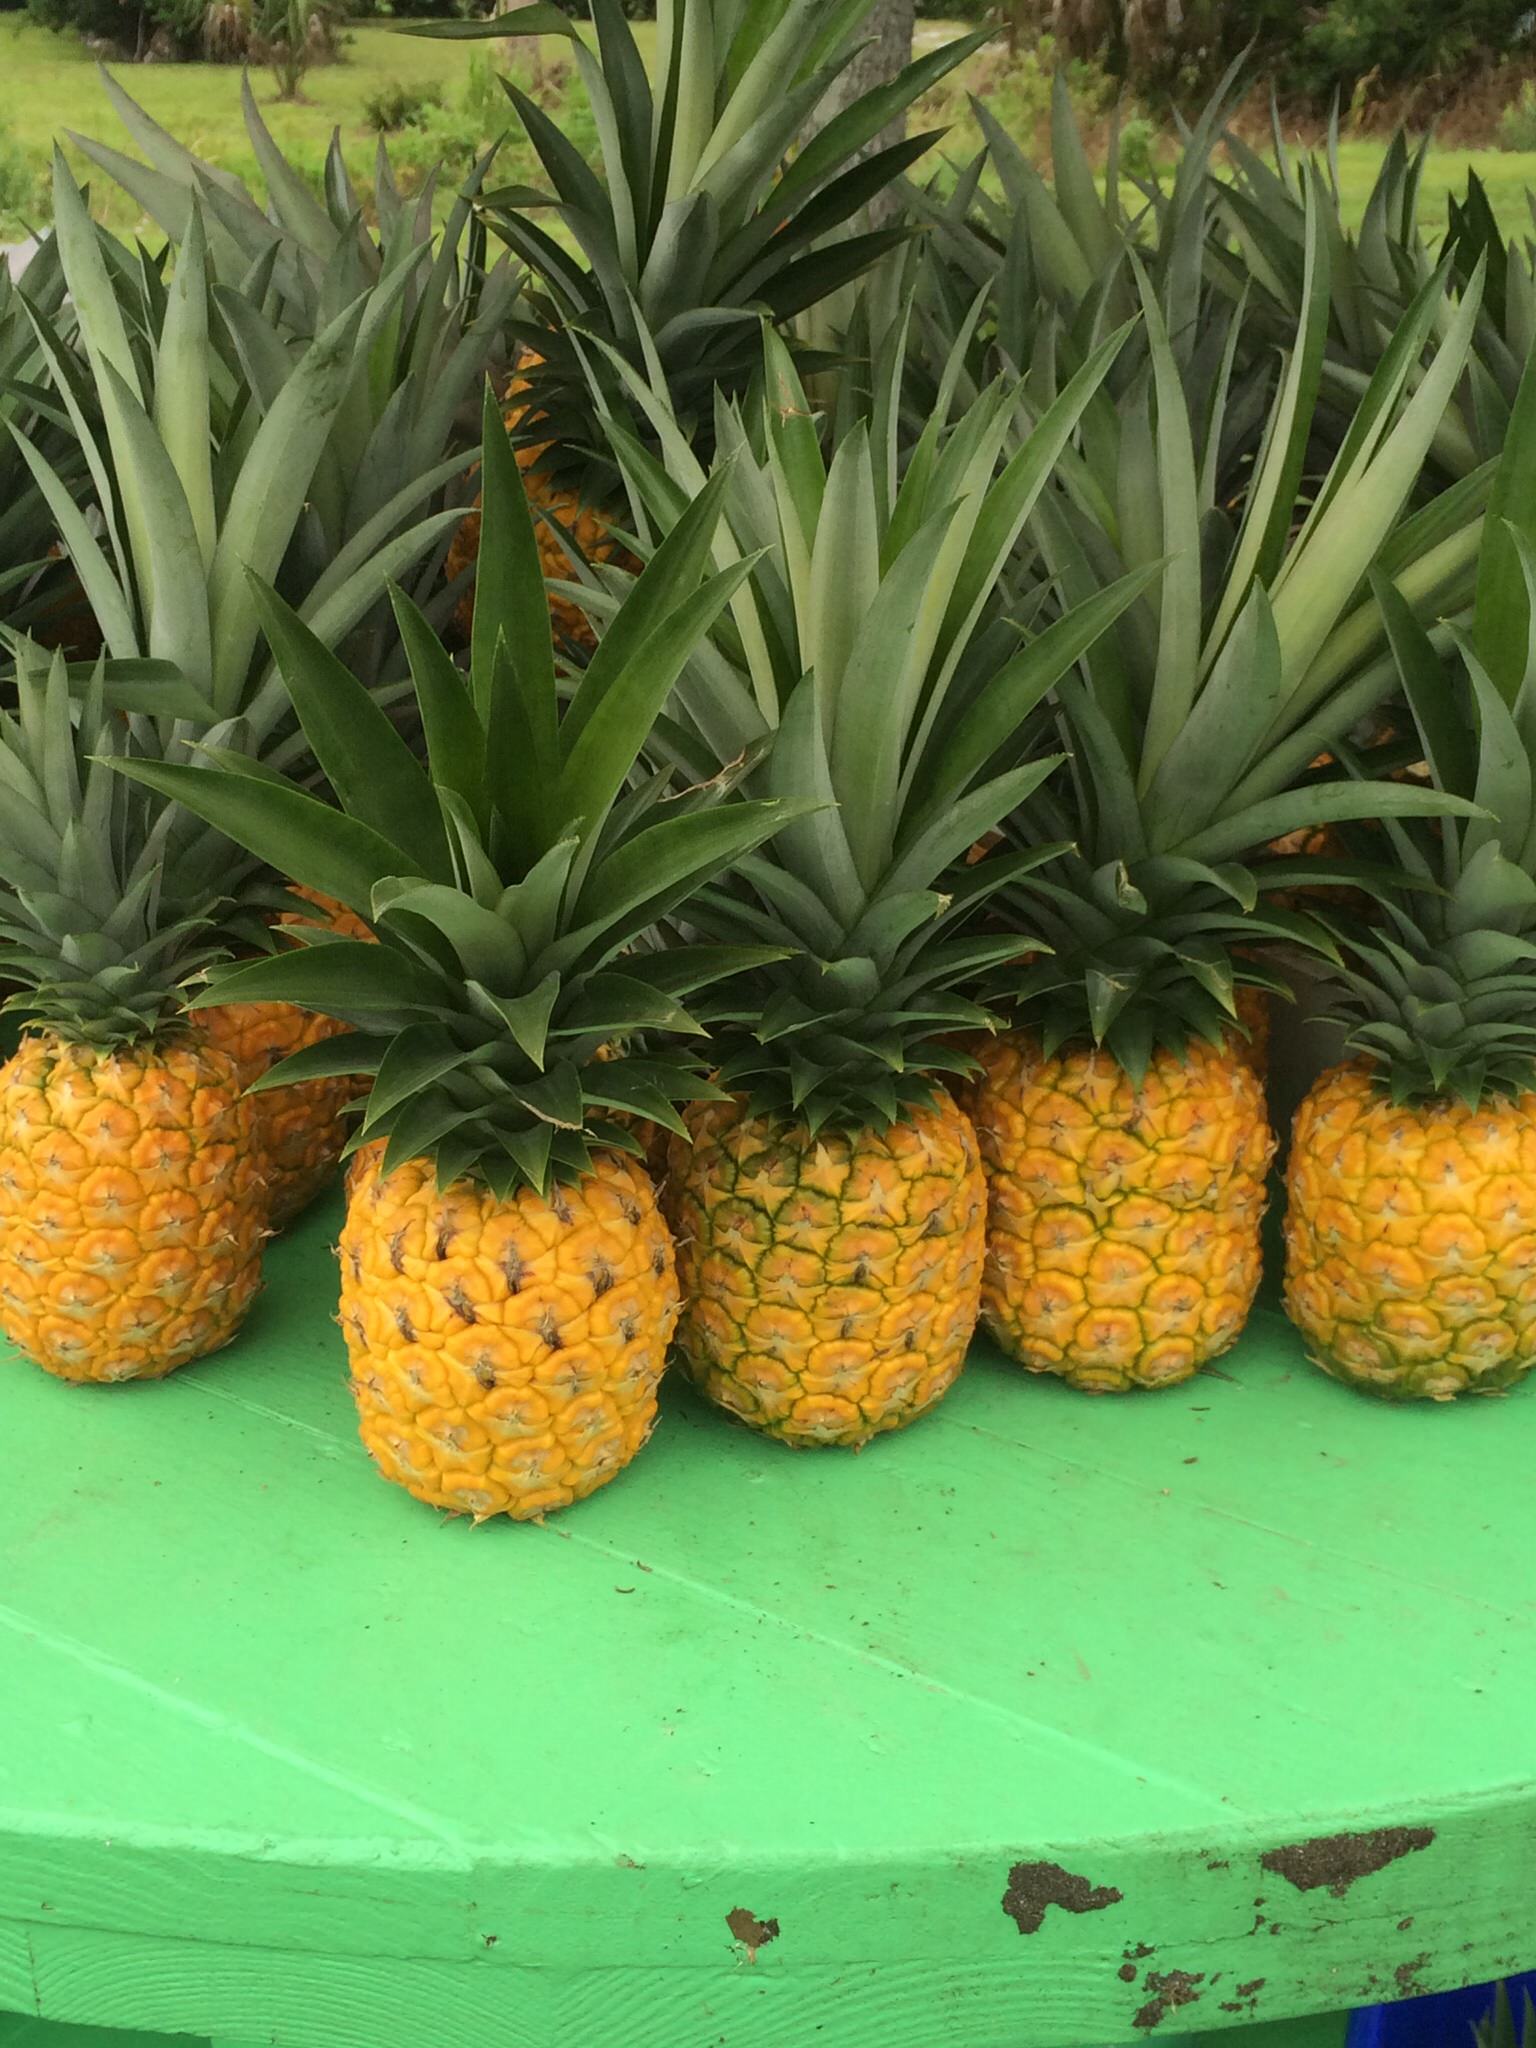 Local Pineapples